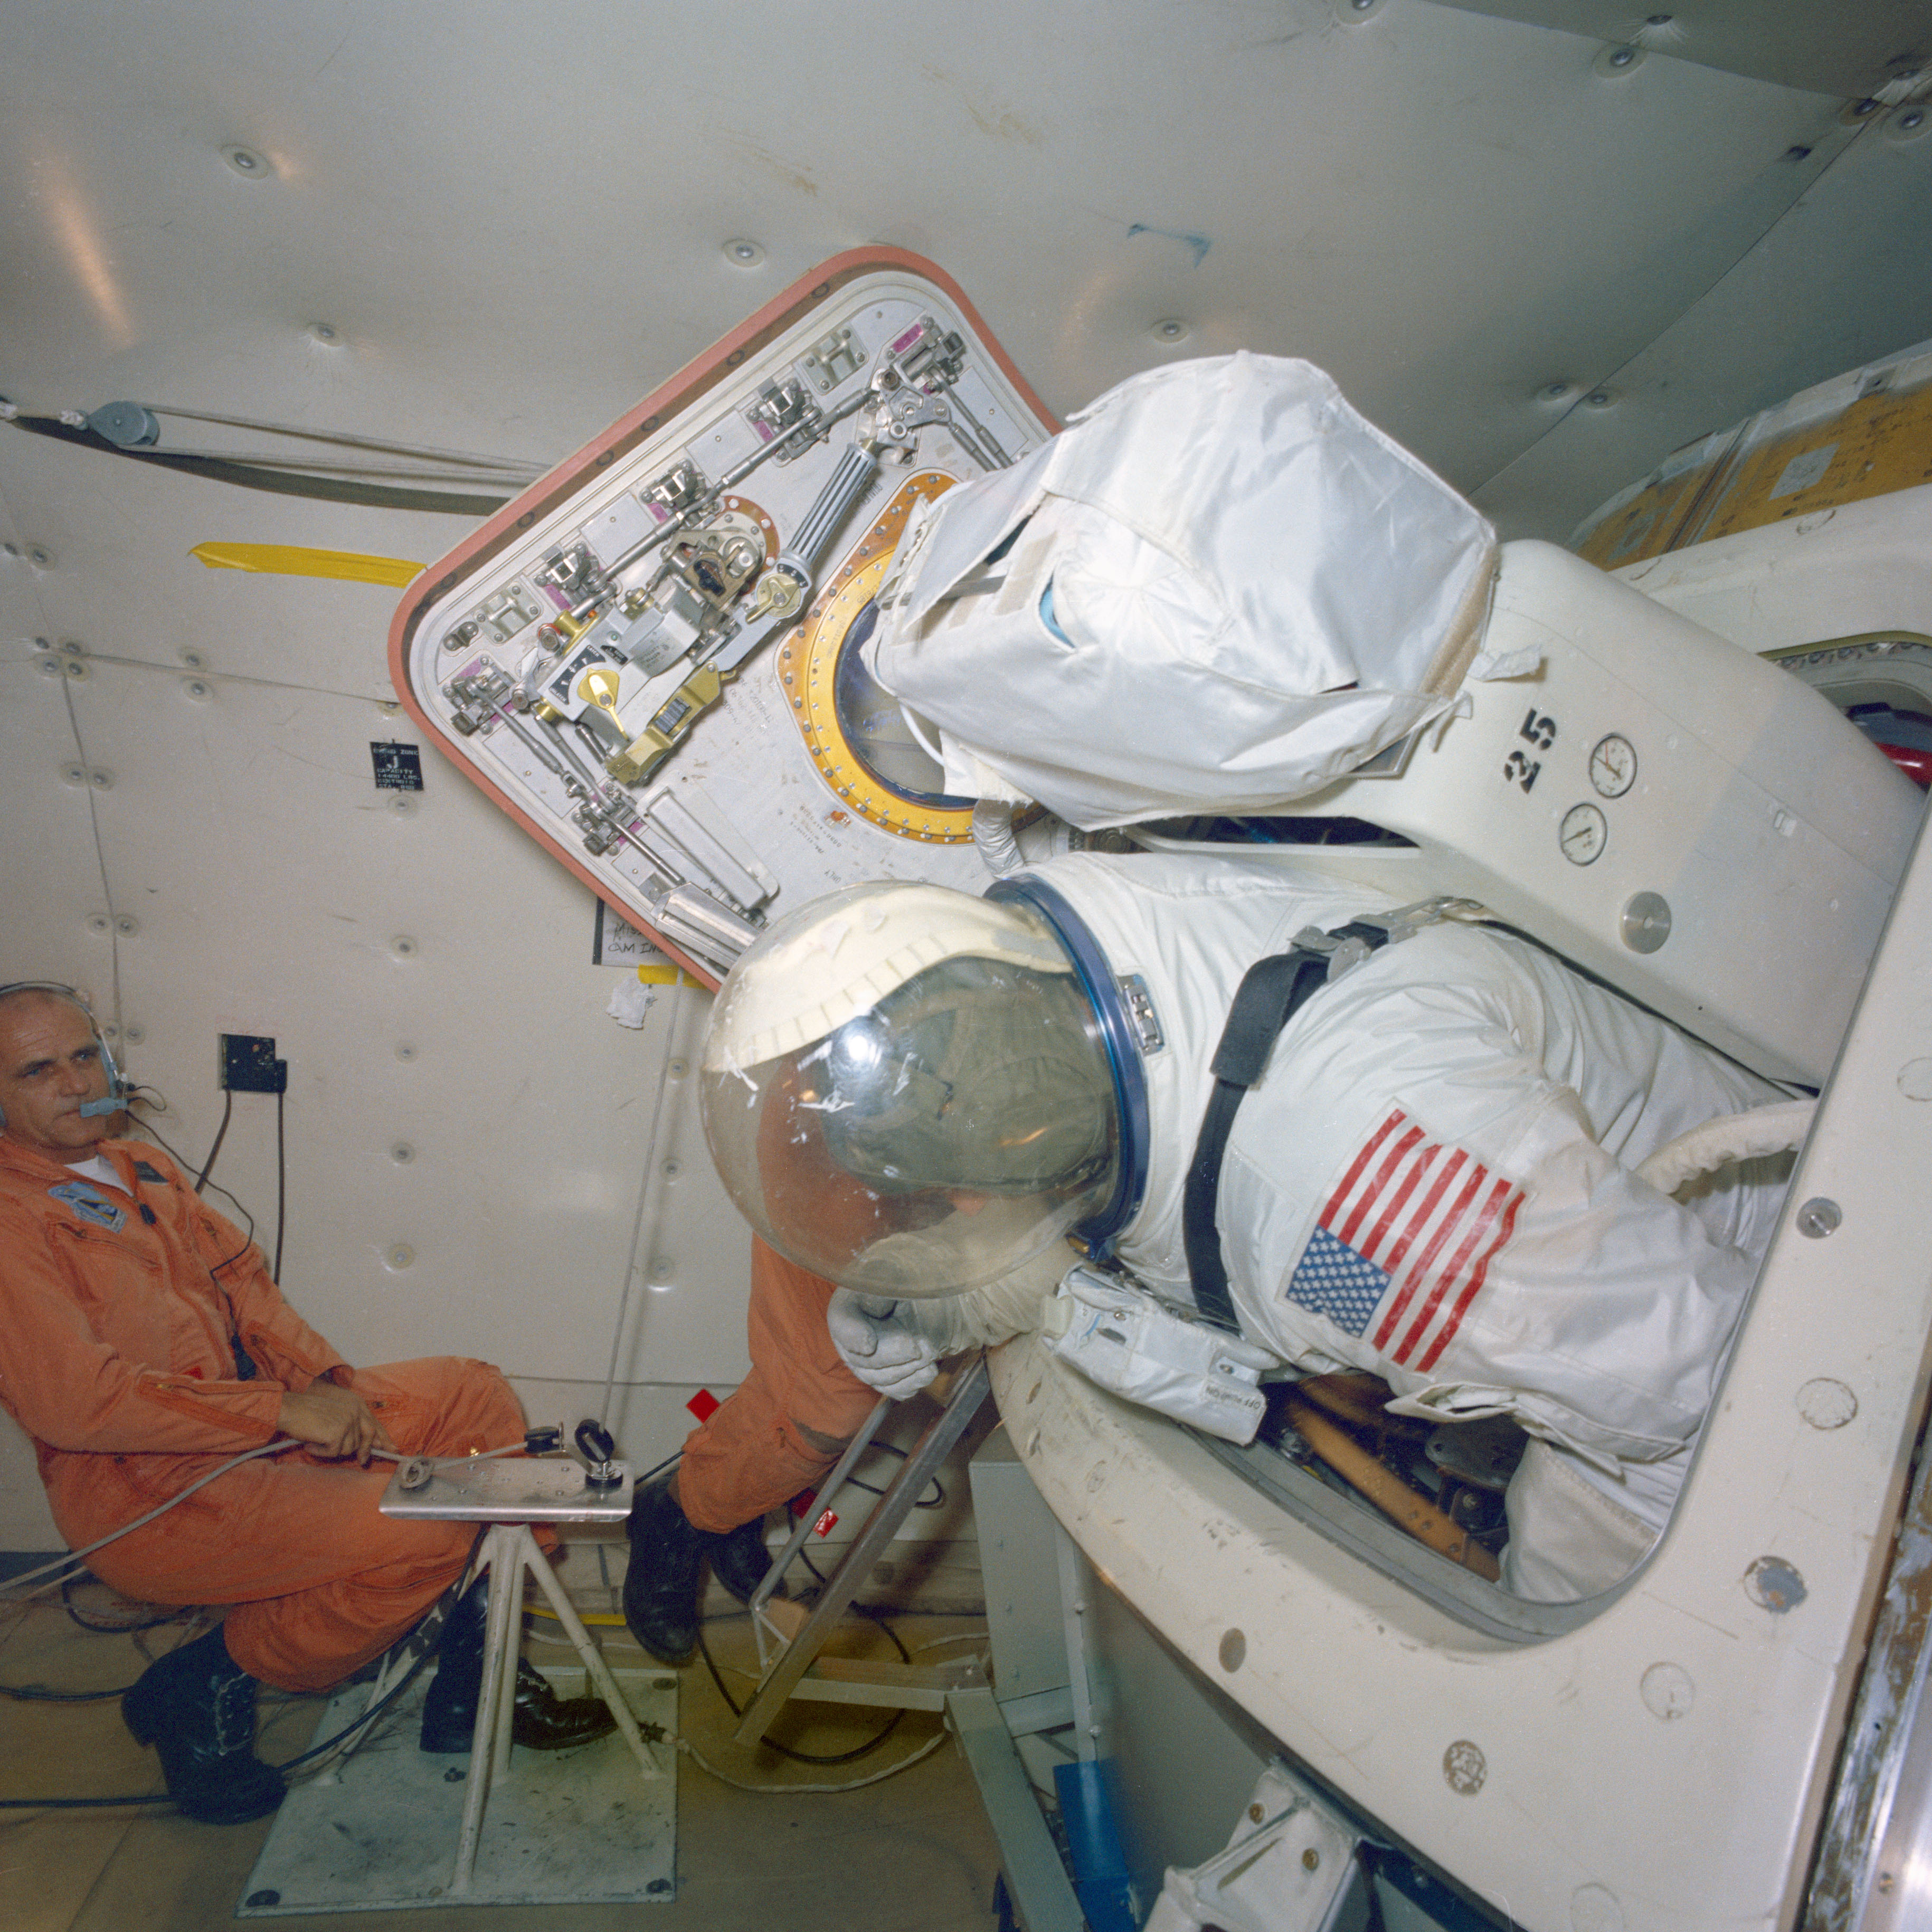 Apollo 9 astronaut Russell L. Schweickart practices entering and leaving the Command Module while wearing a pressure suit during brief periods of weightlessness aboard a KC-135 aircraft